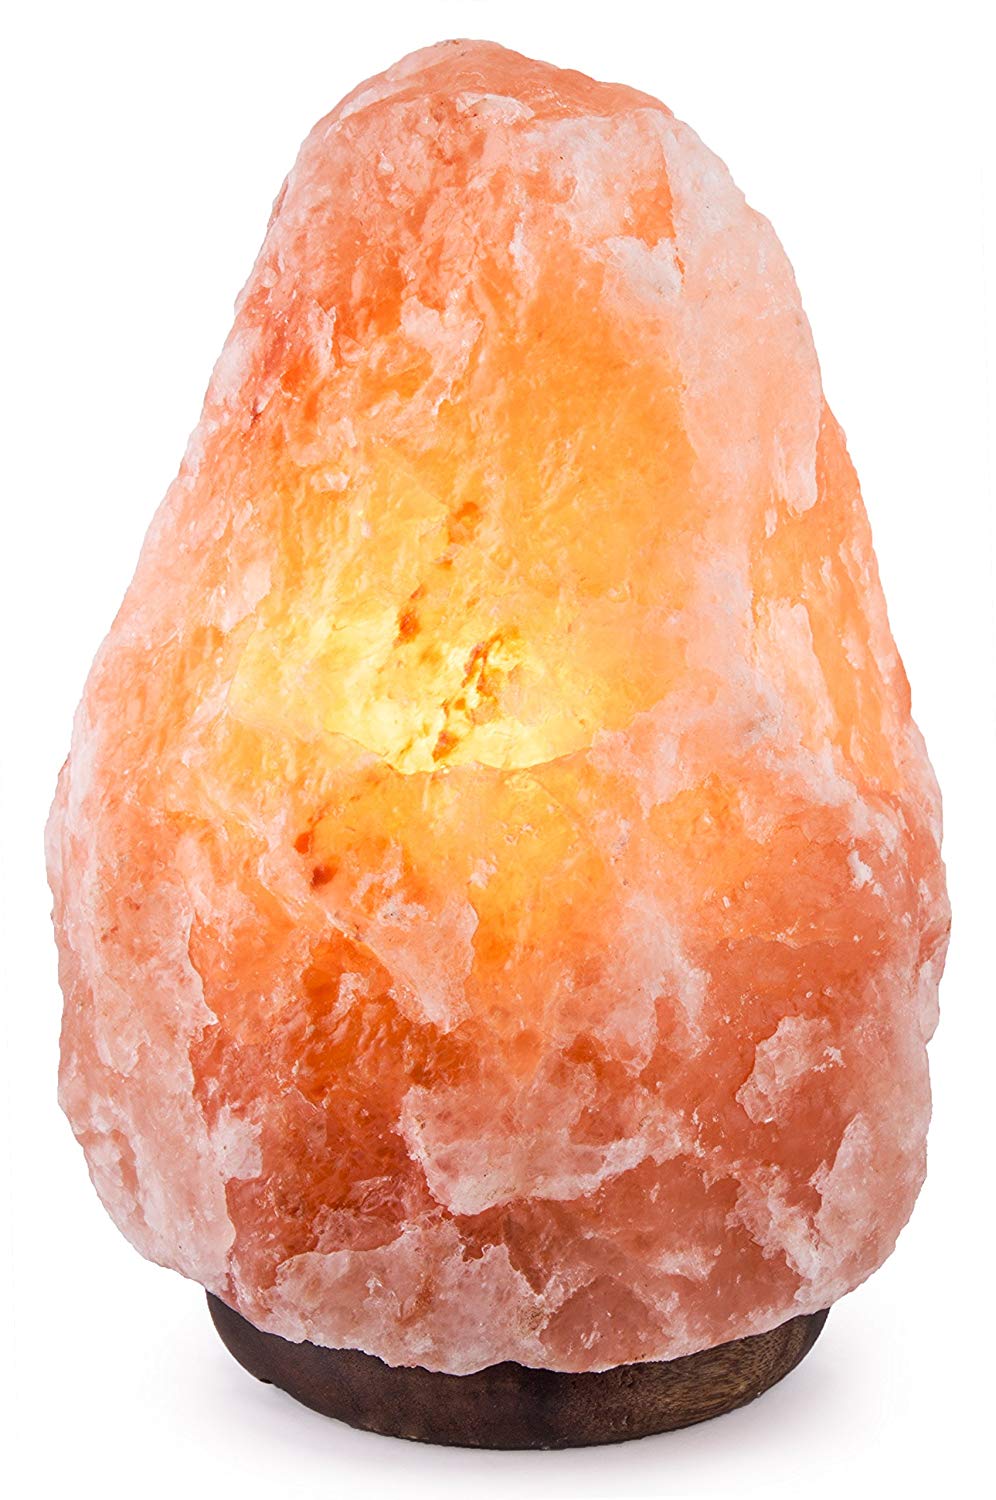 CRYSTAL DECOR 7” to 8”, 6-8 lbs Dimmable Hand Crafted Natural Himalayan Salt Lamp On Wooden Base